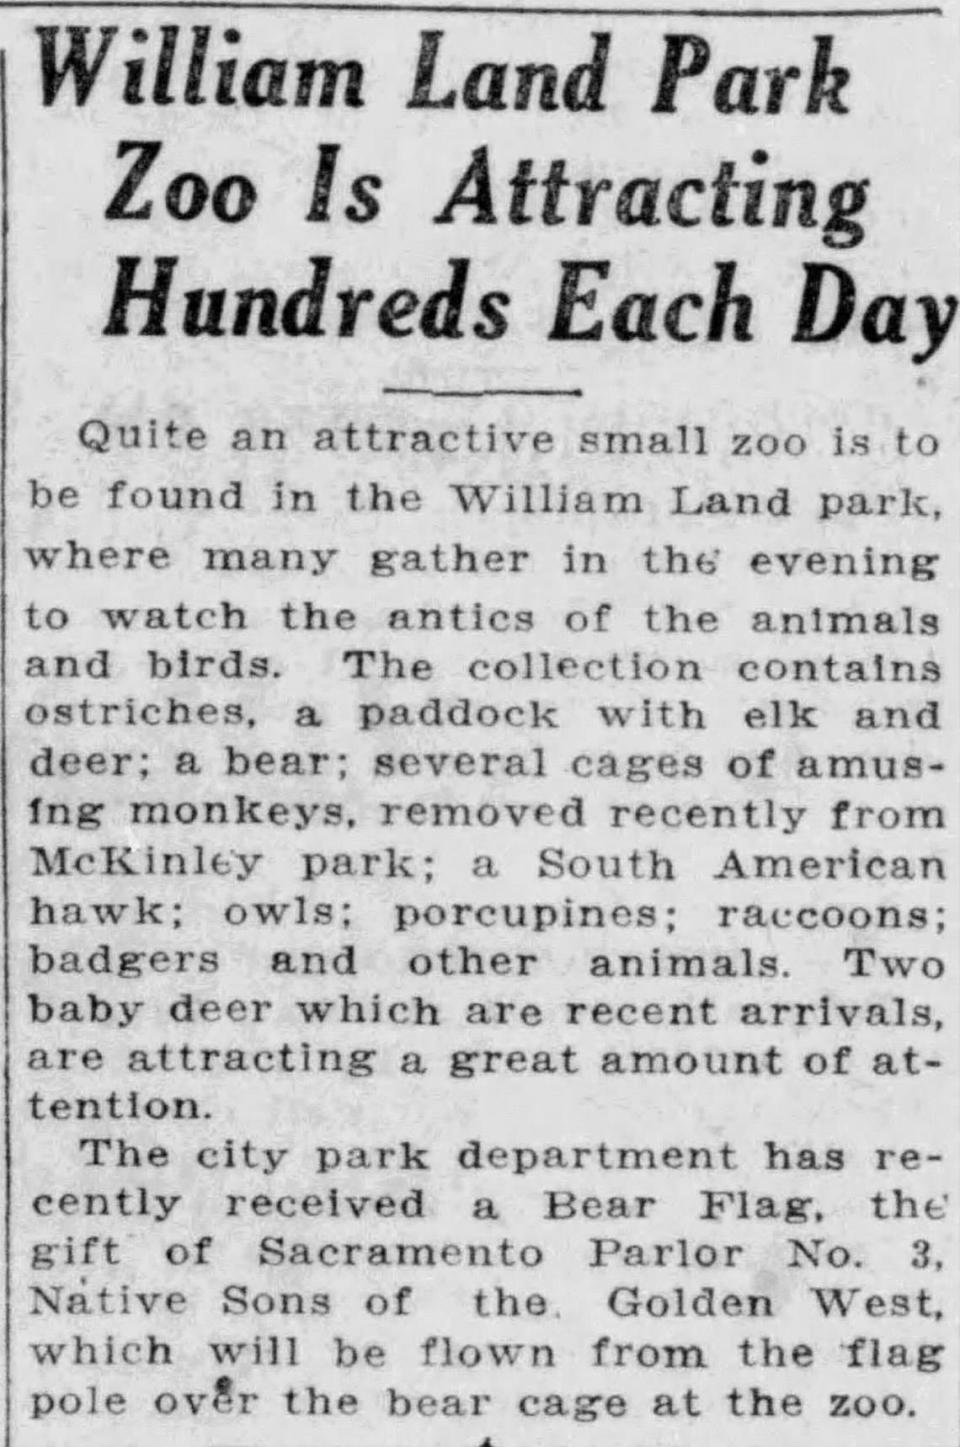 A story in the Aug. 9, 1925, edition of The Sacramento Union, highlights Land Park Zoo as an evening attraction.